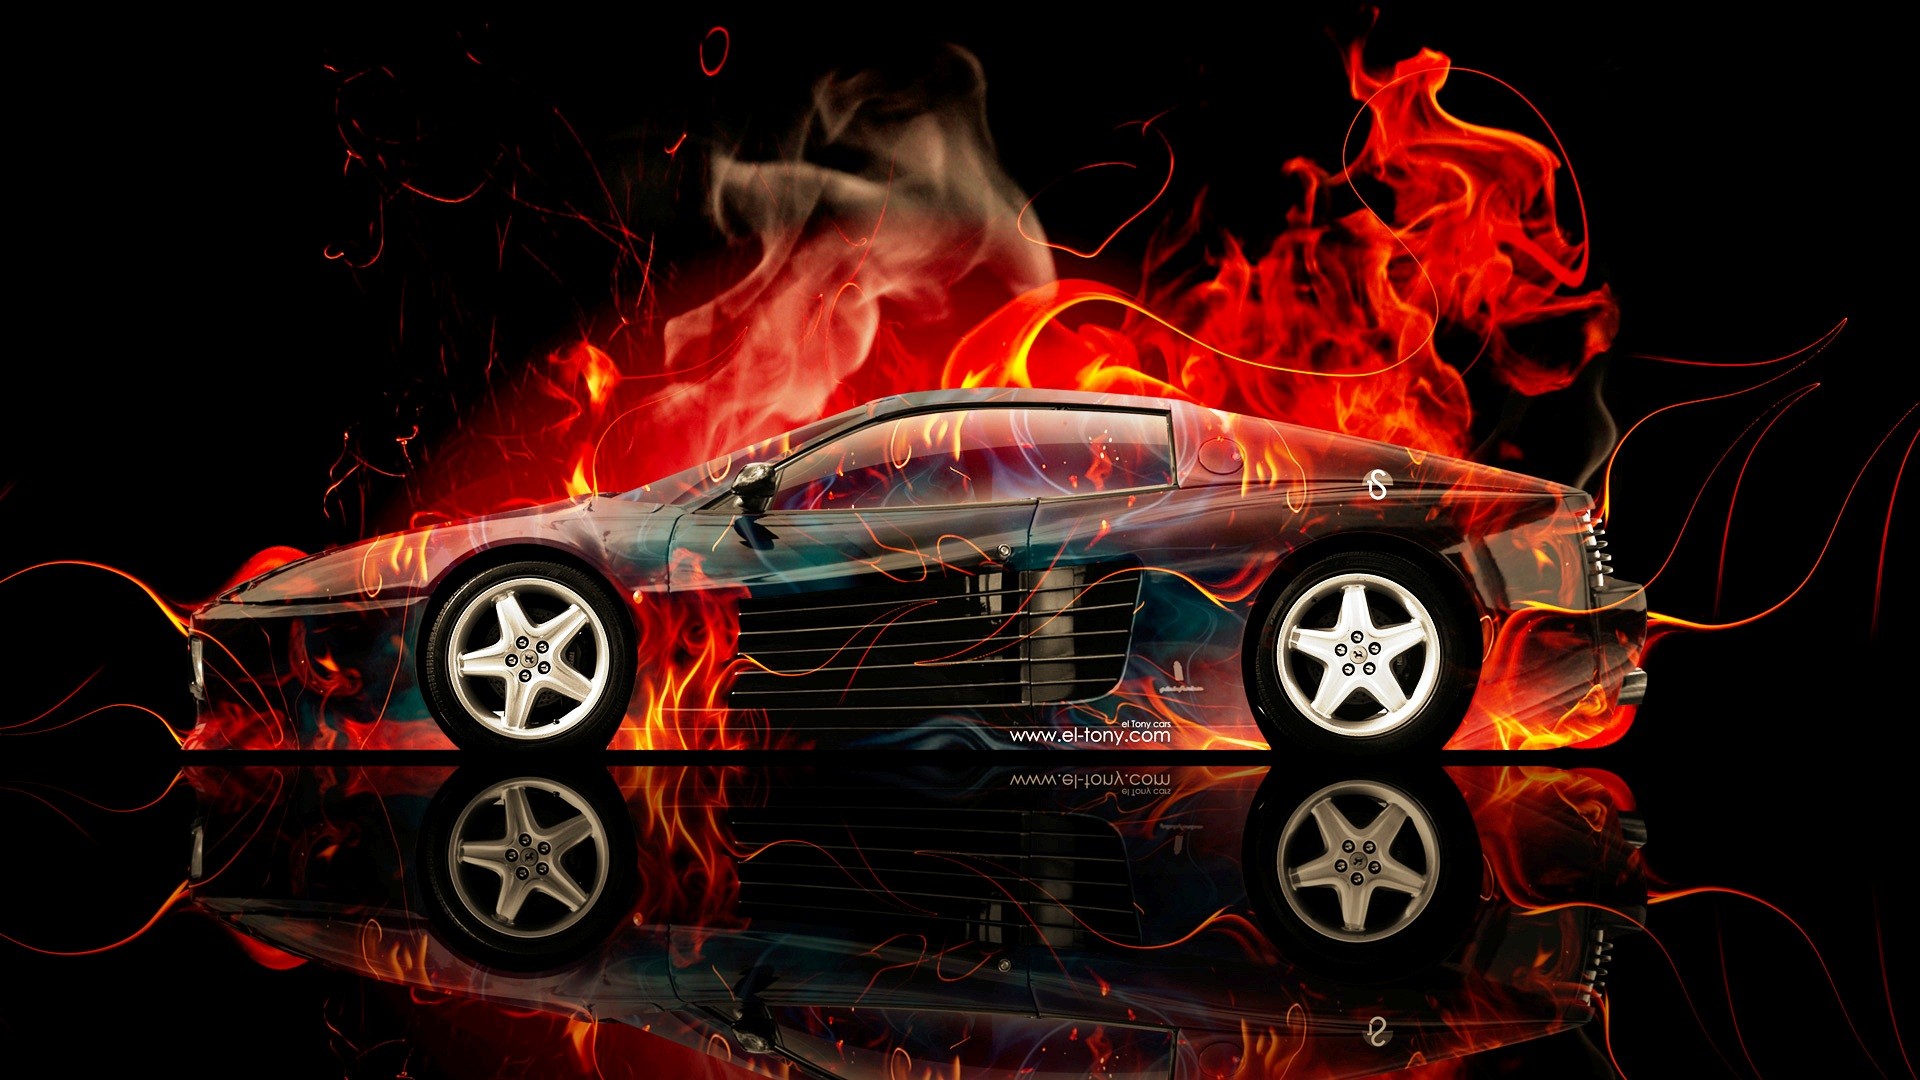 Design Talent Showcase Tony.com Brings Sensual Elements Fire And Water To YOUR Car Wallpaper 8